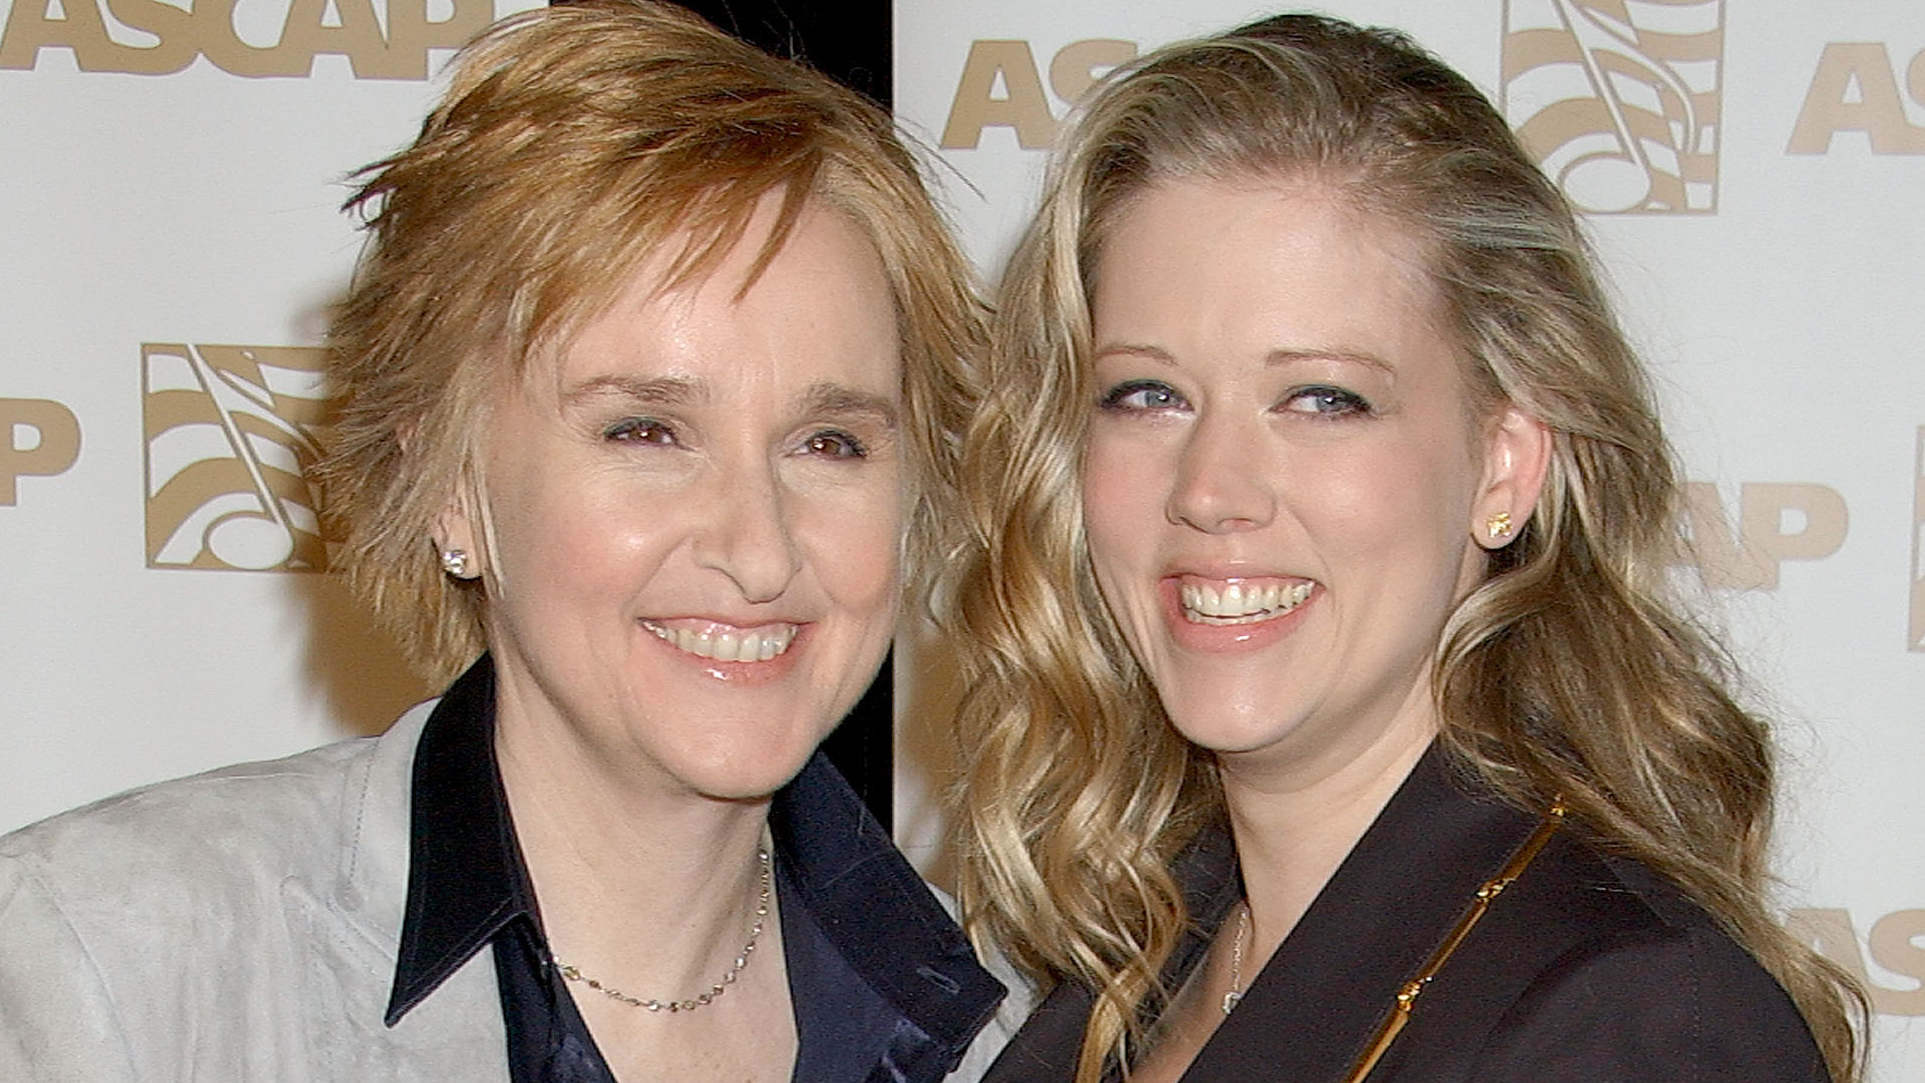 Melissa Etheridge Reaches Deal With Ex-Wife Tammy To Decrease Child Support Payments